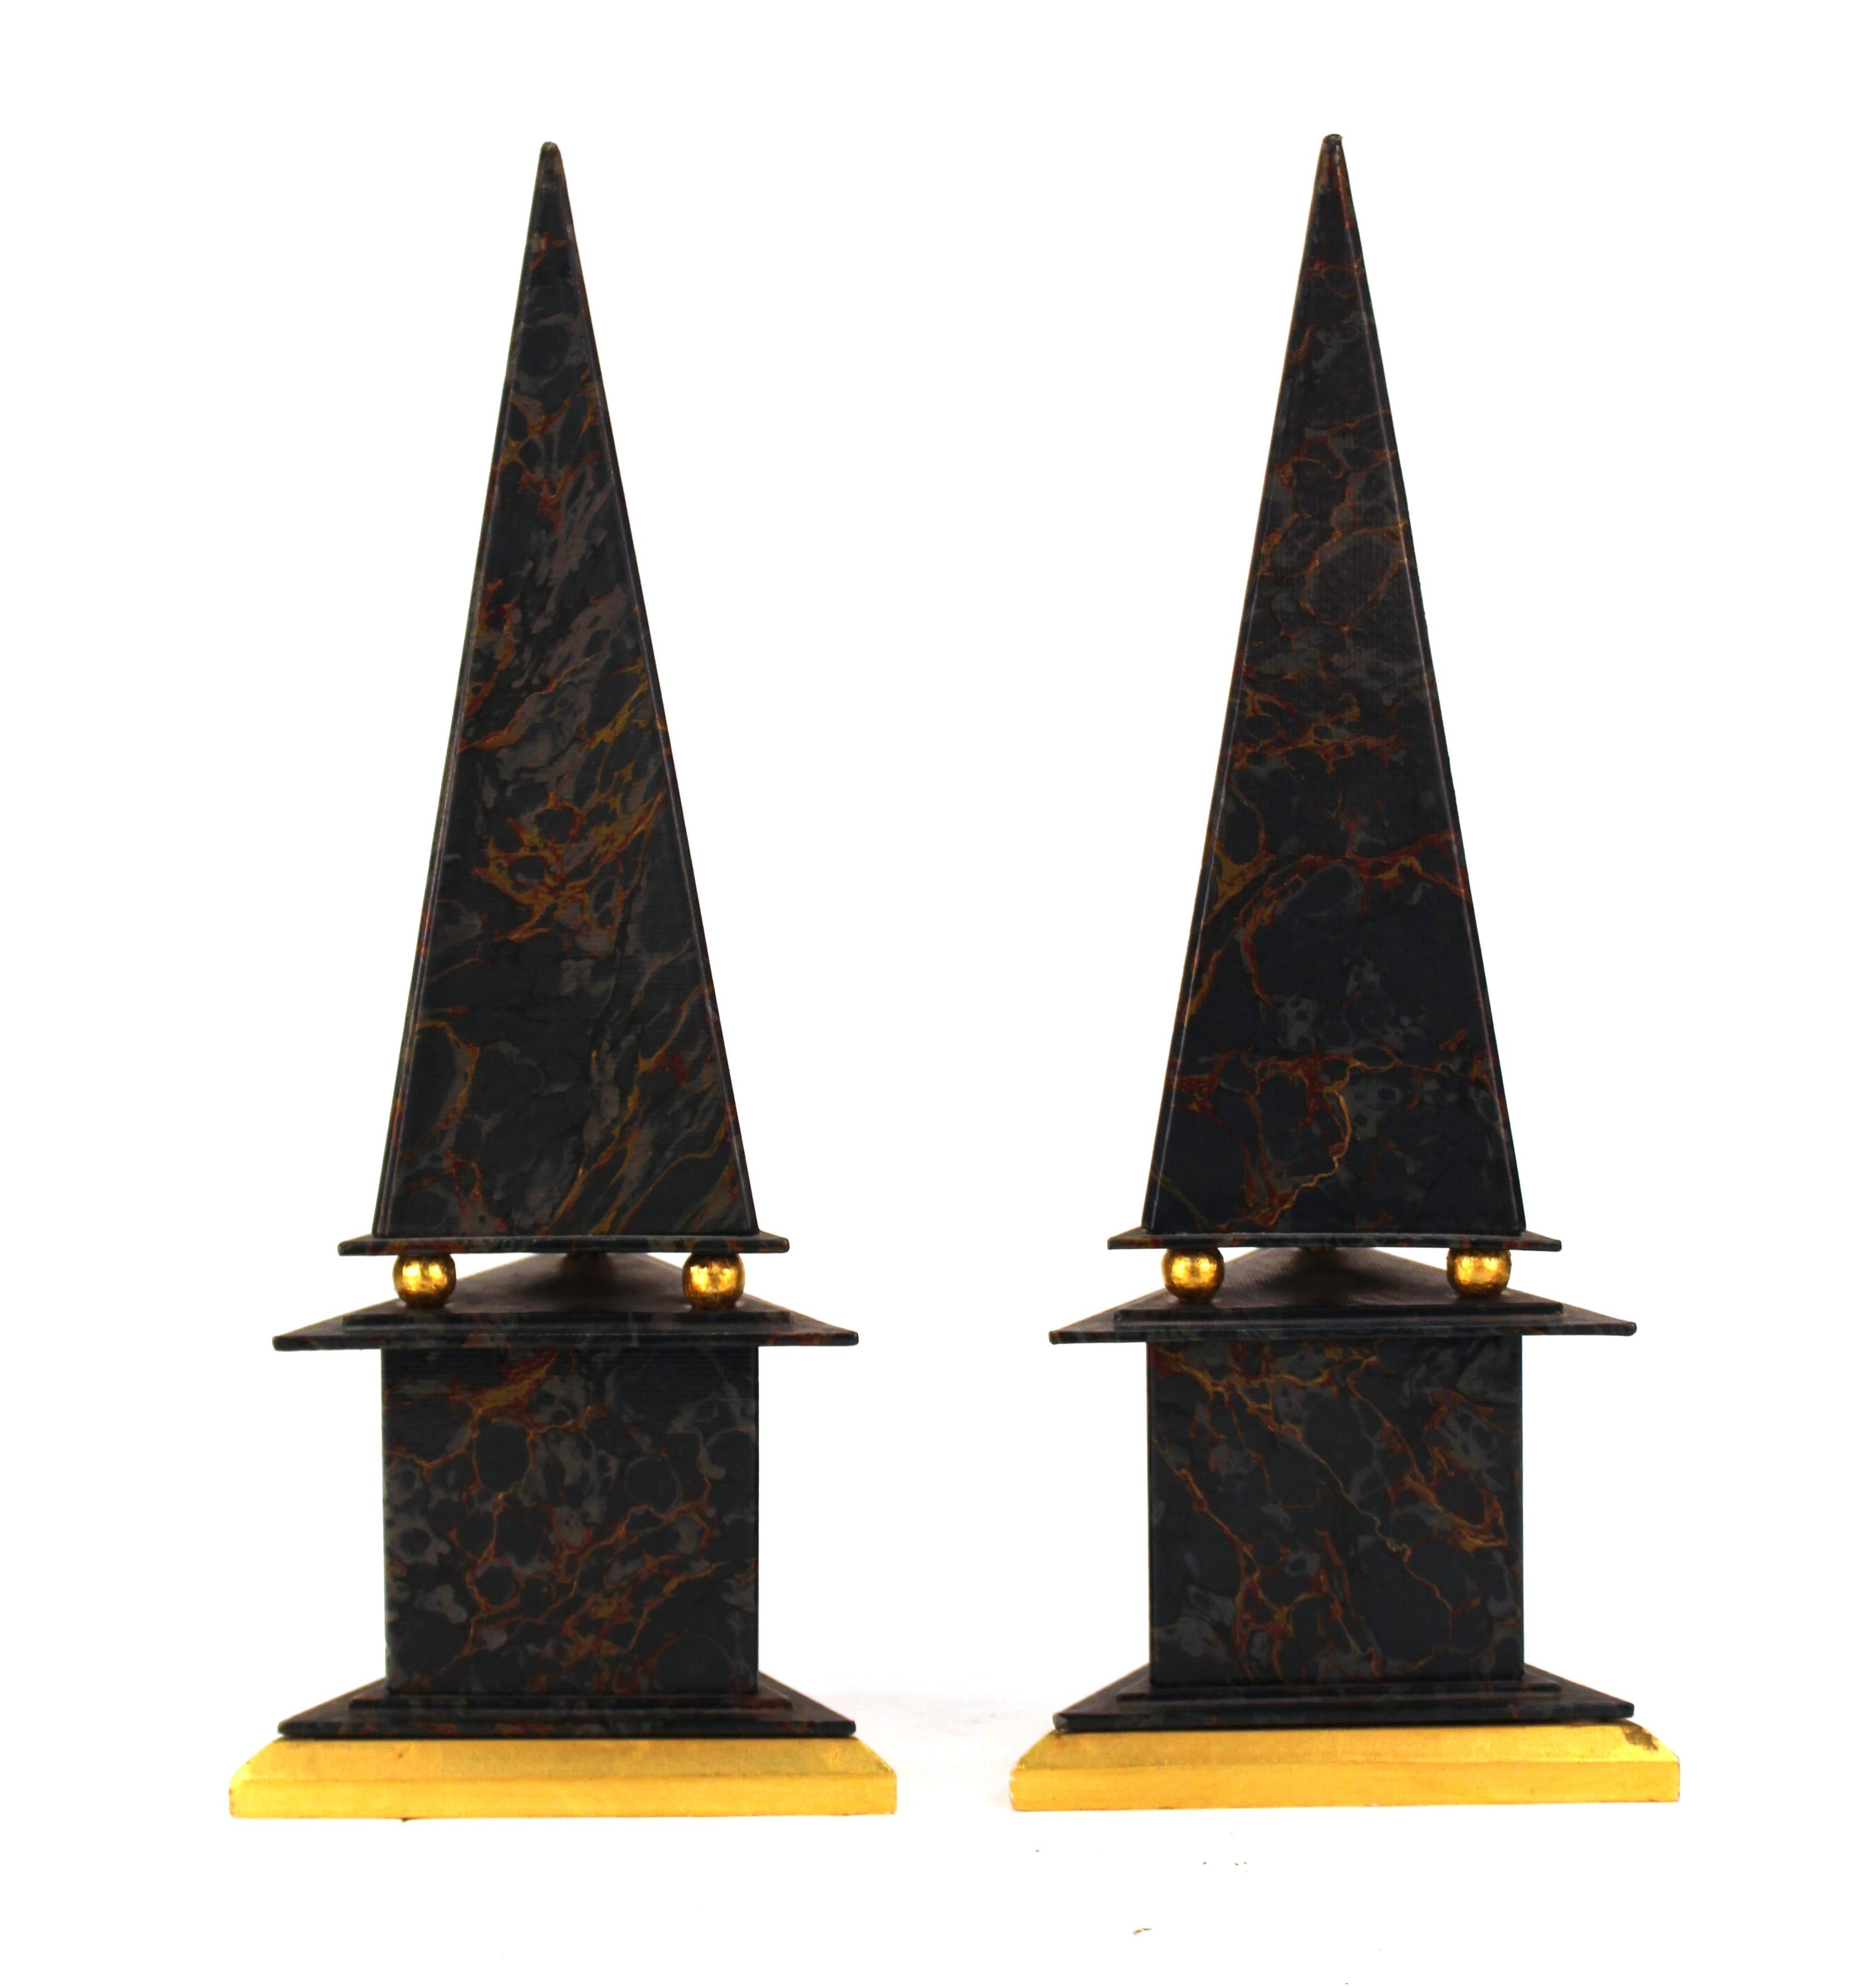 Neoclassical Revival Neoclassical Style Obelisks in Marbled Paper and Gold Foil For Sale